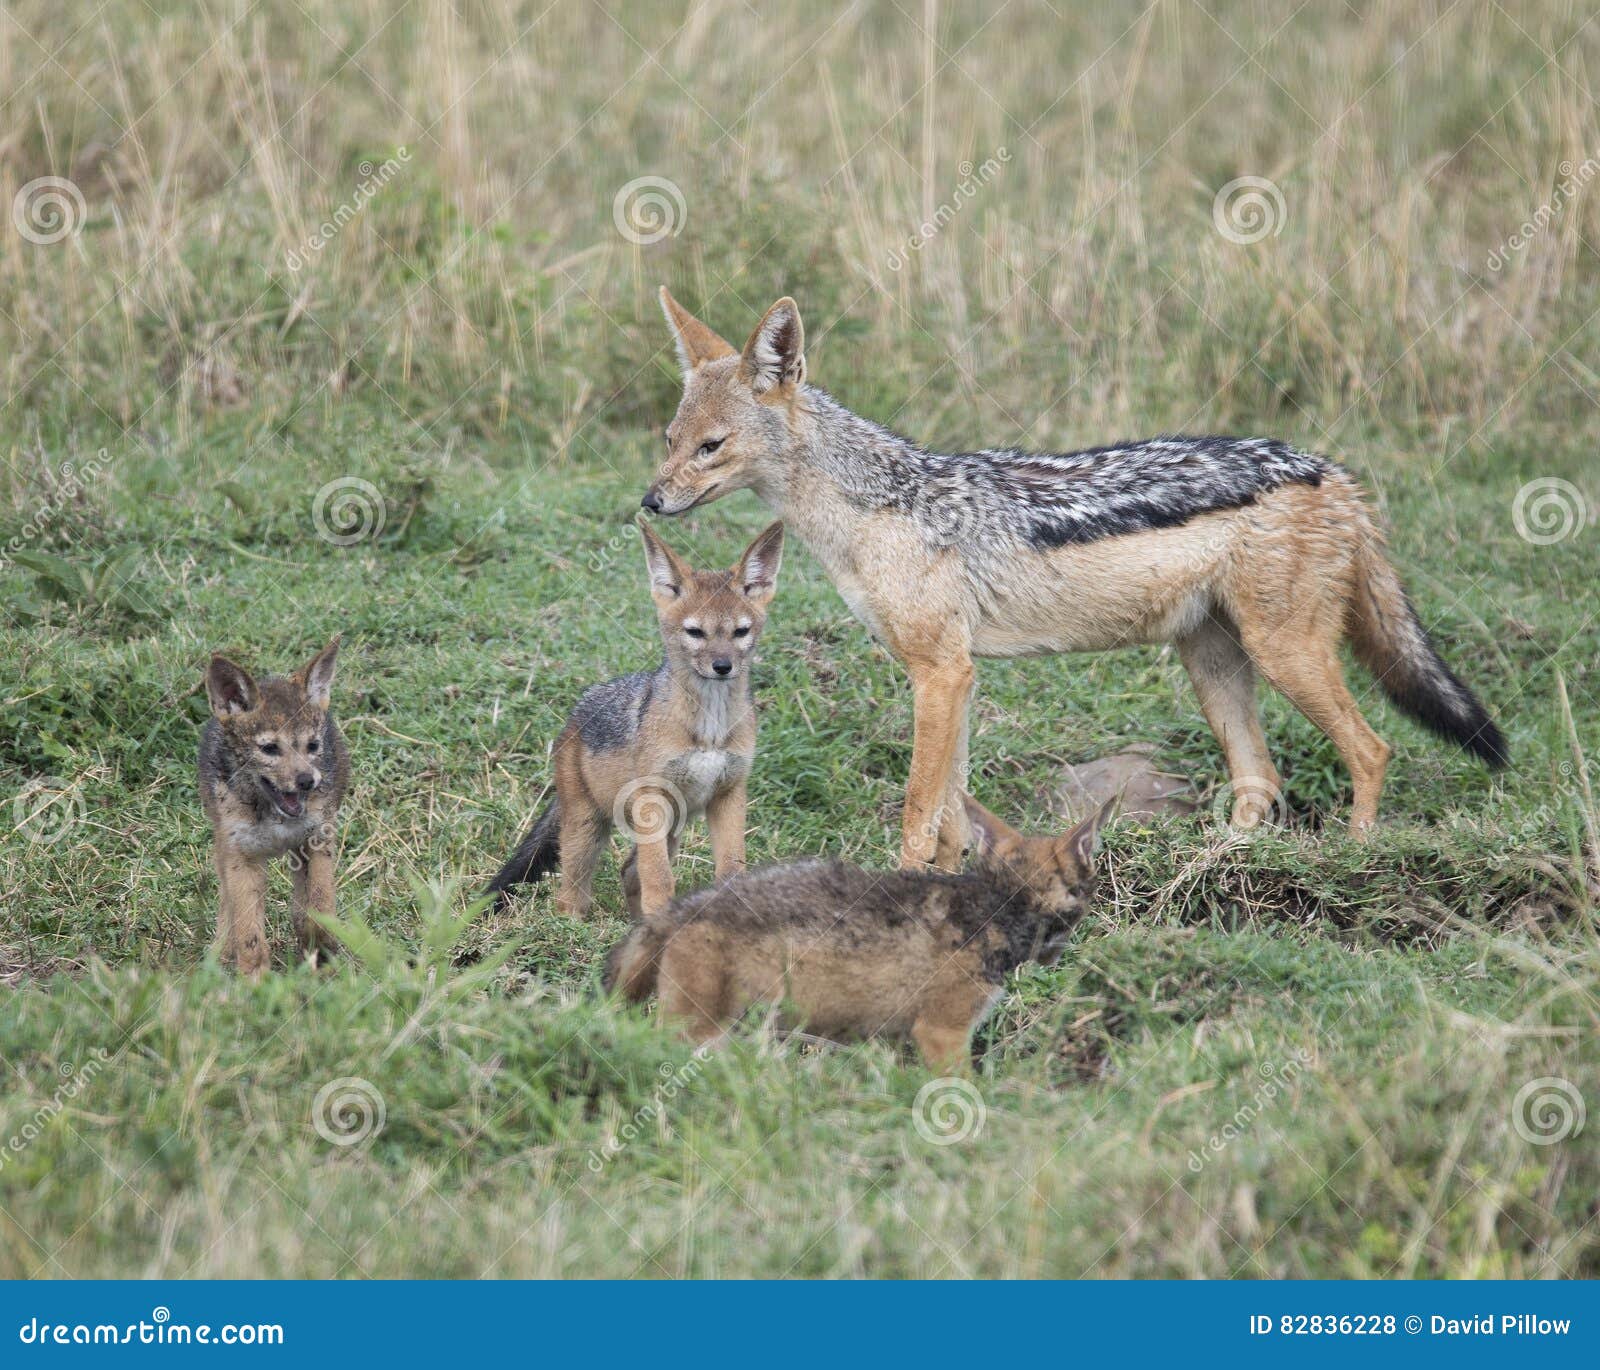 mother black-backed jackal standing with three cubs